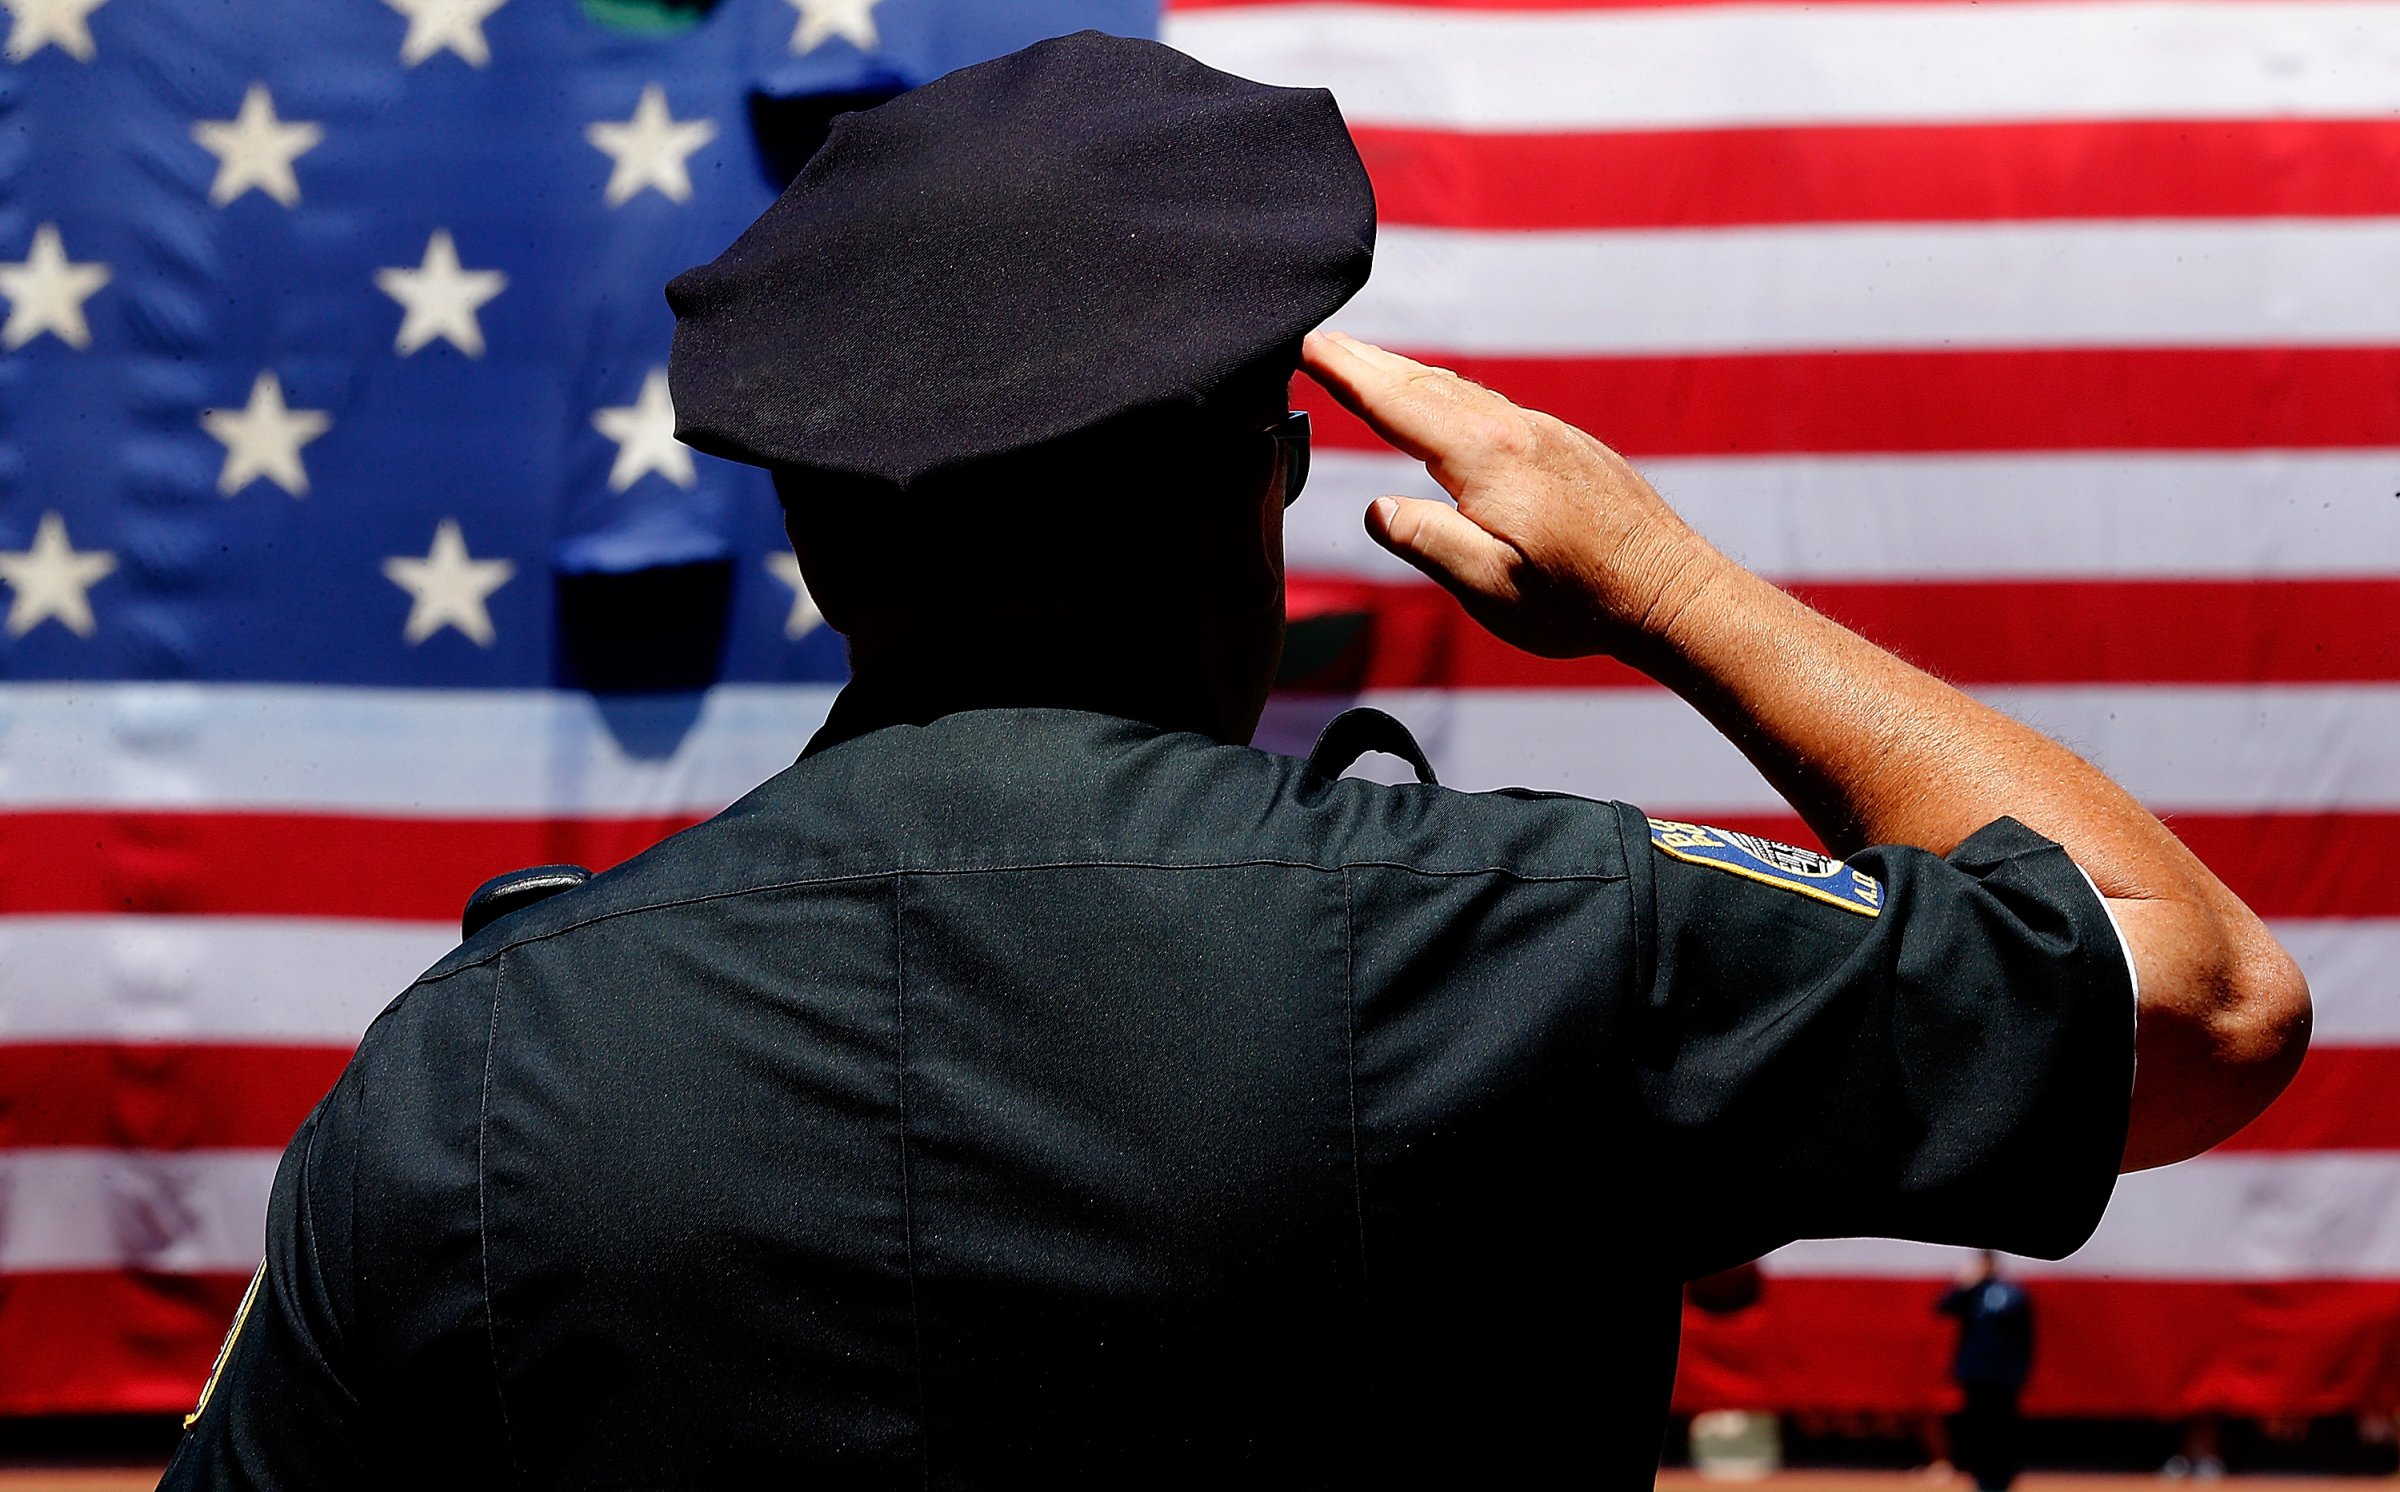 A police officer salutes during the National Anthem before the first game of a doubleheader between the Baltimore Orioles and the Boston Red Sox at Fenway Park on July 5, 2014 in Boston.